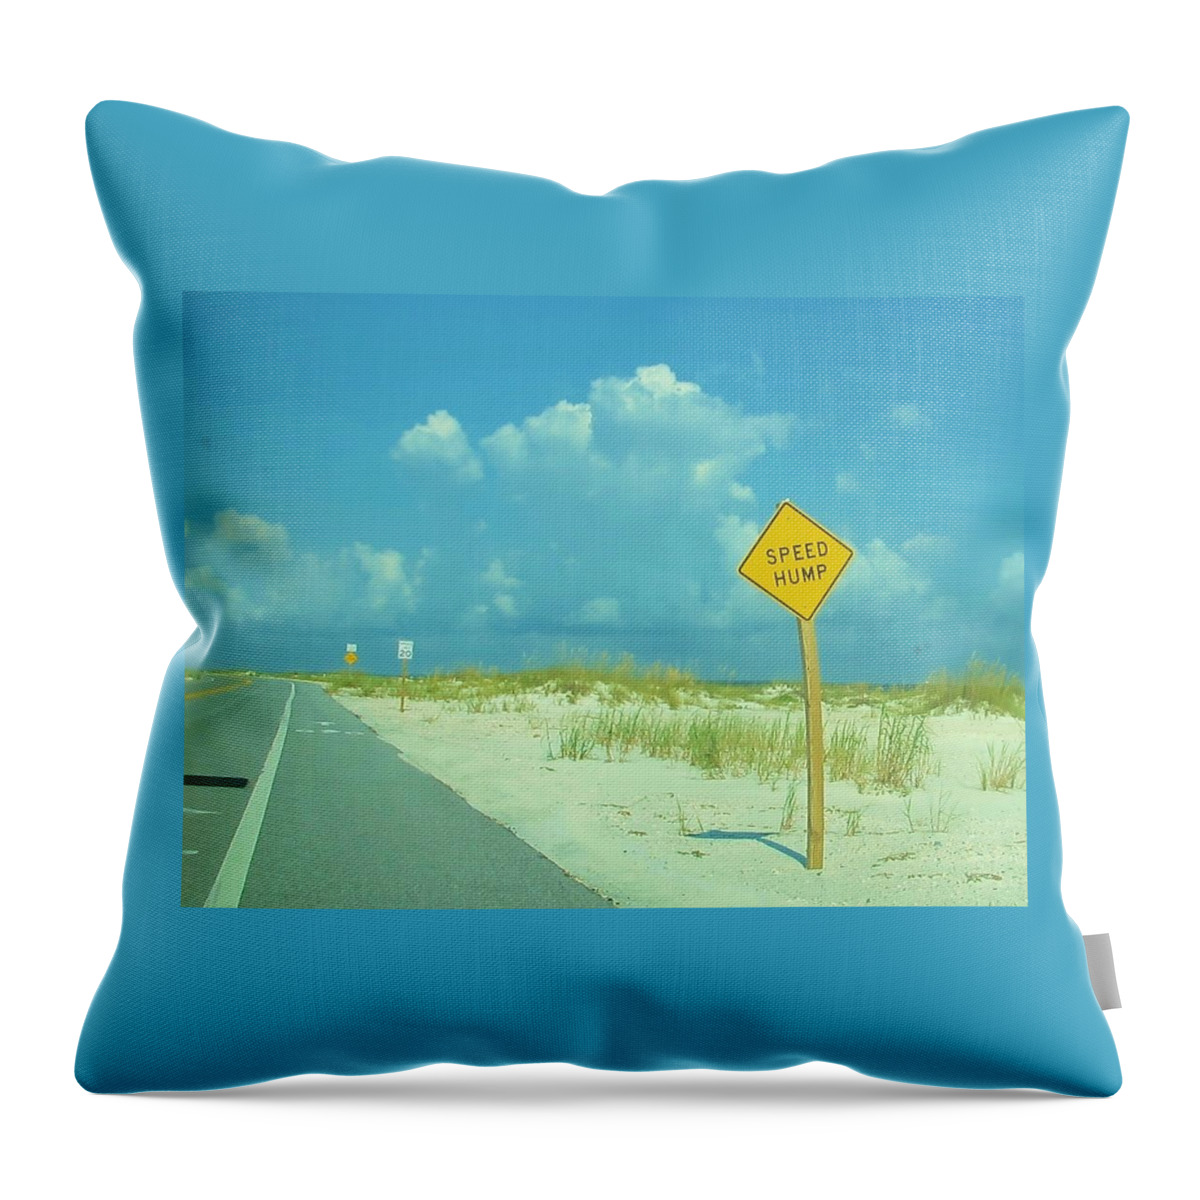 Street Sign Throw Pillow featuring the photograph Speed Hump by Deborah Lacoste